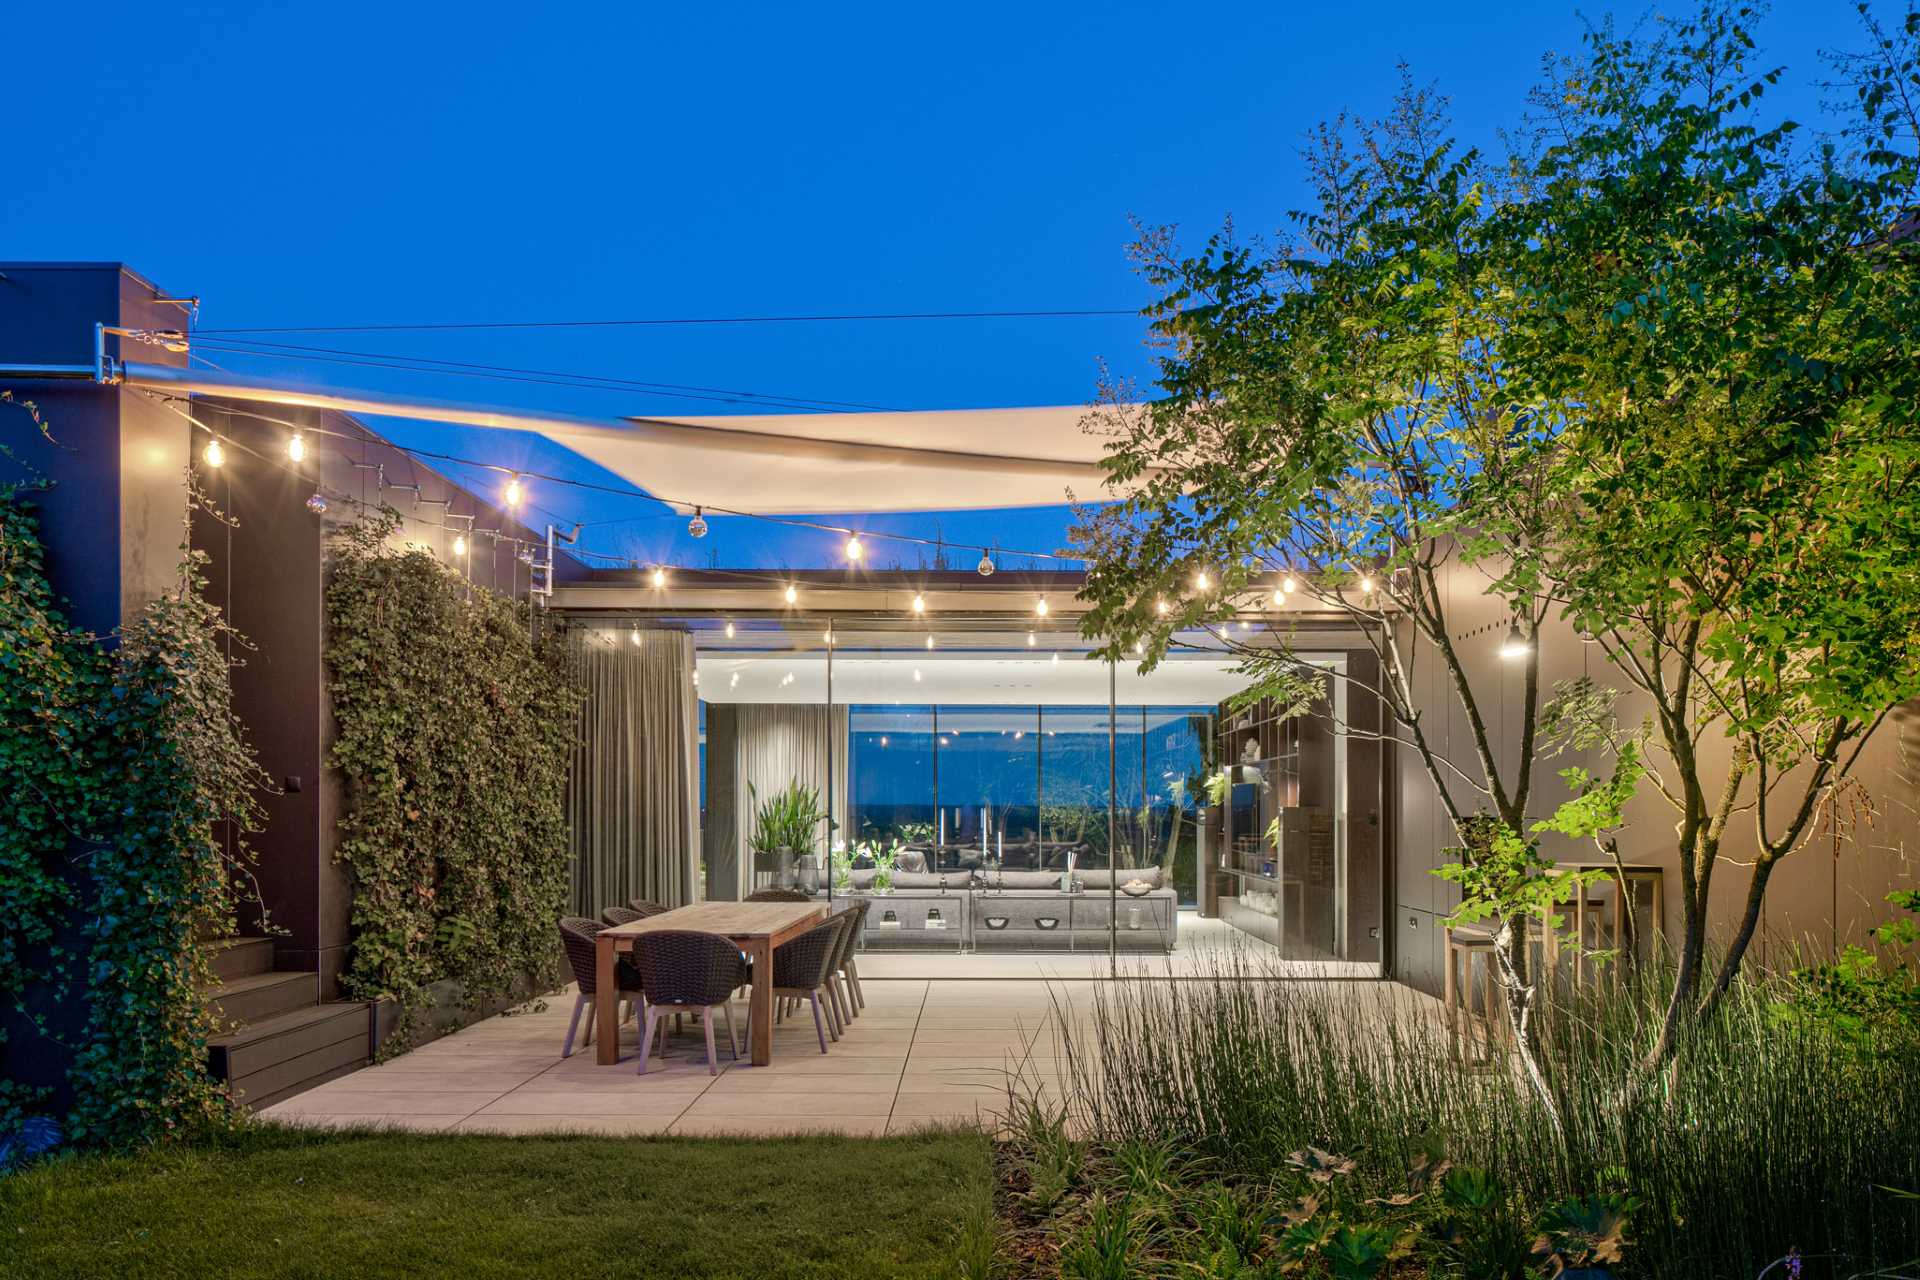 A modern house with an outdoor dining area that's lit with string lights.